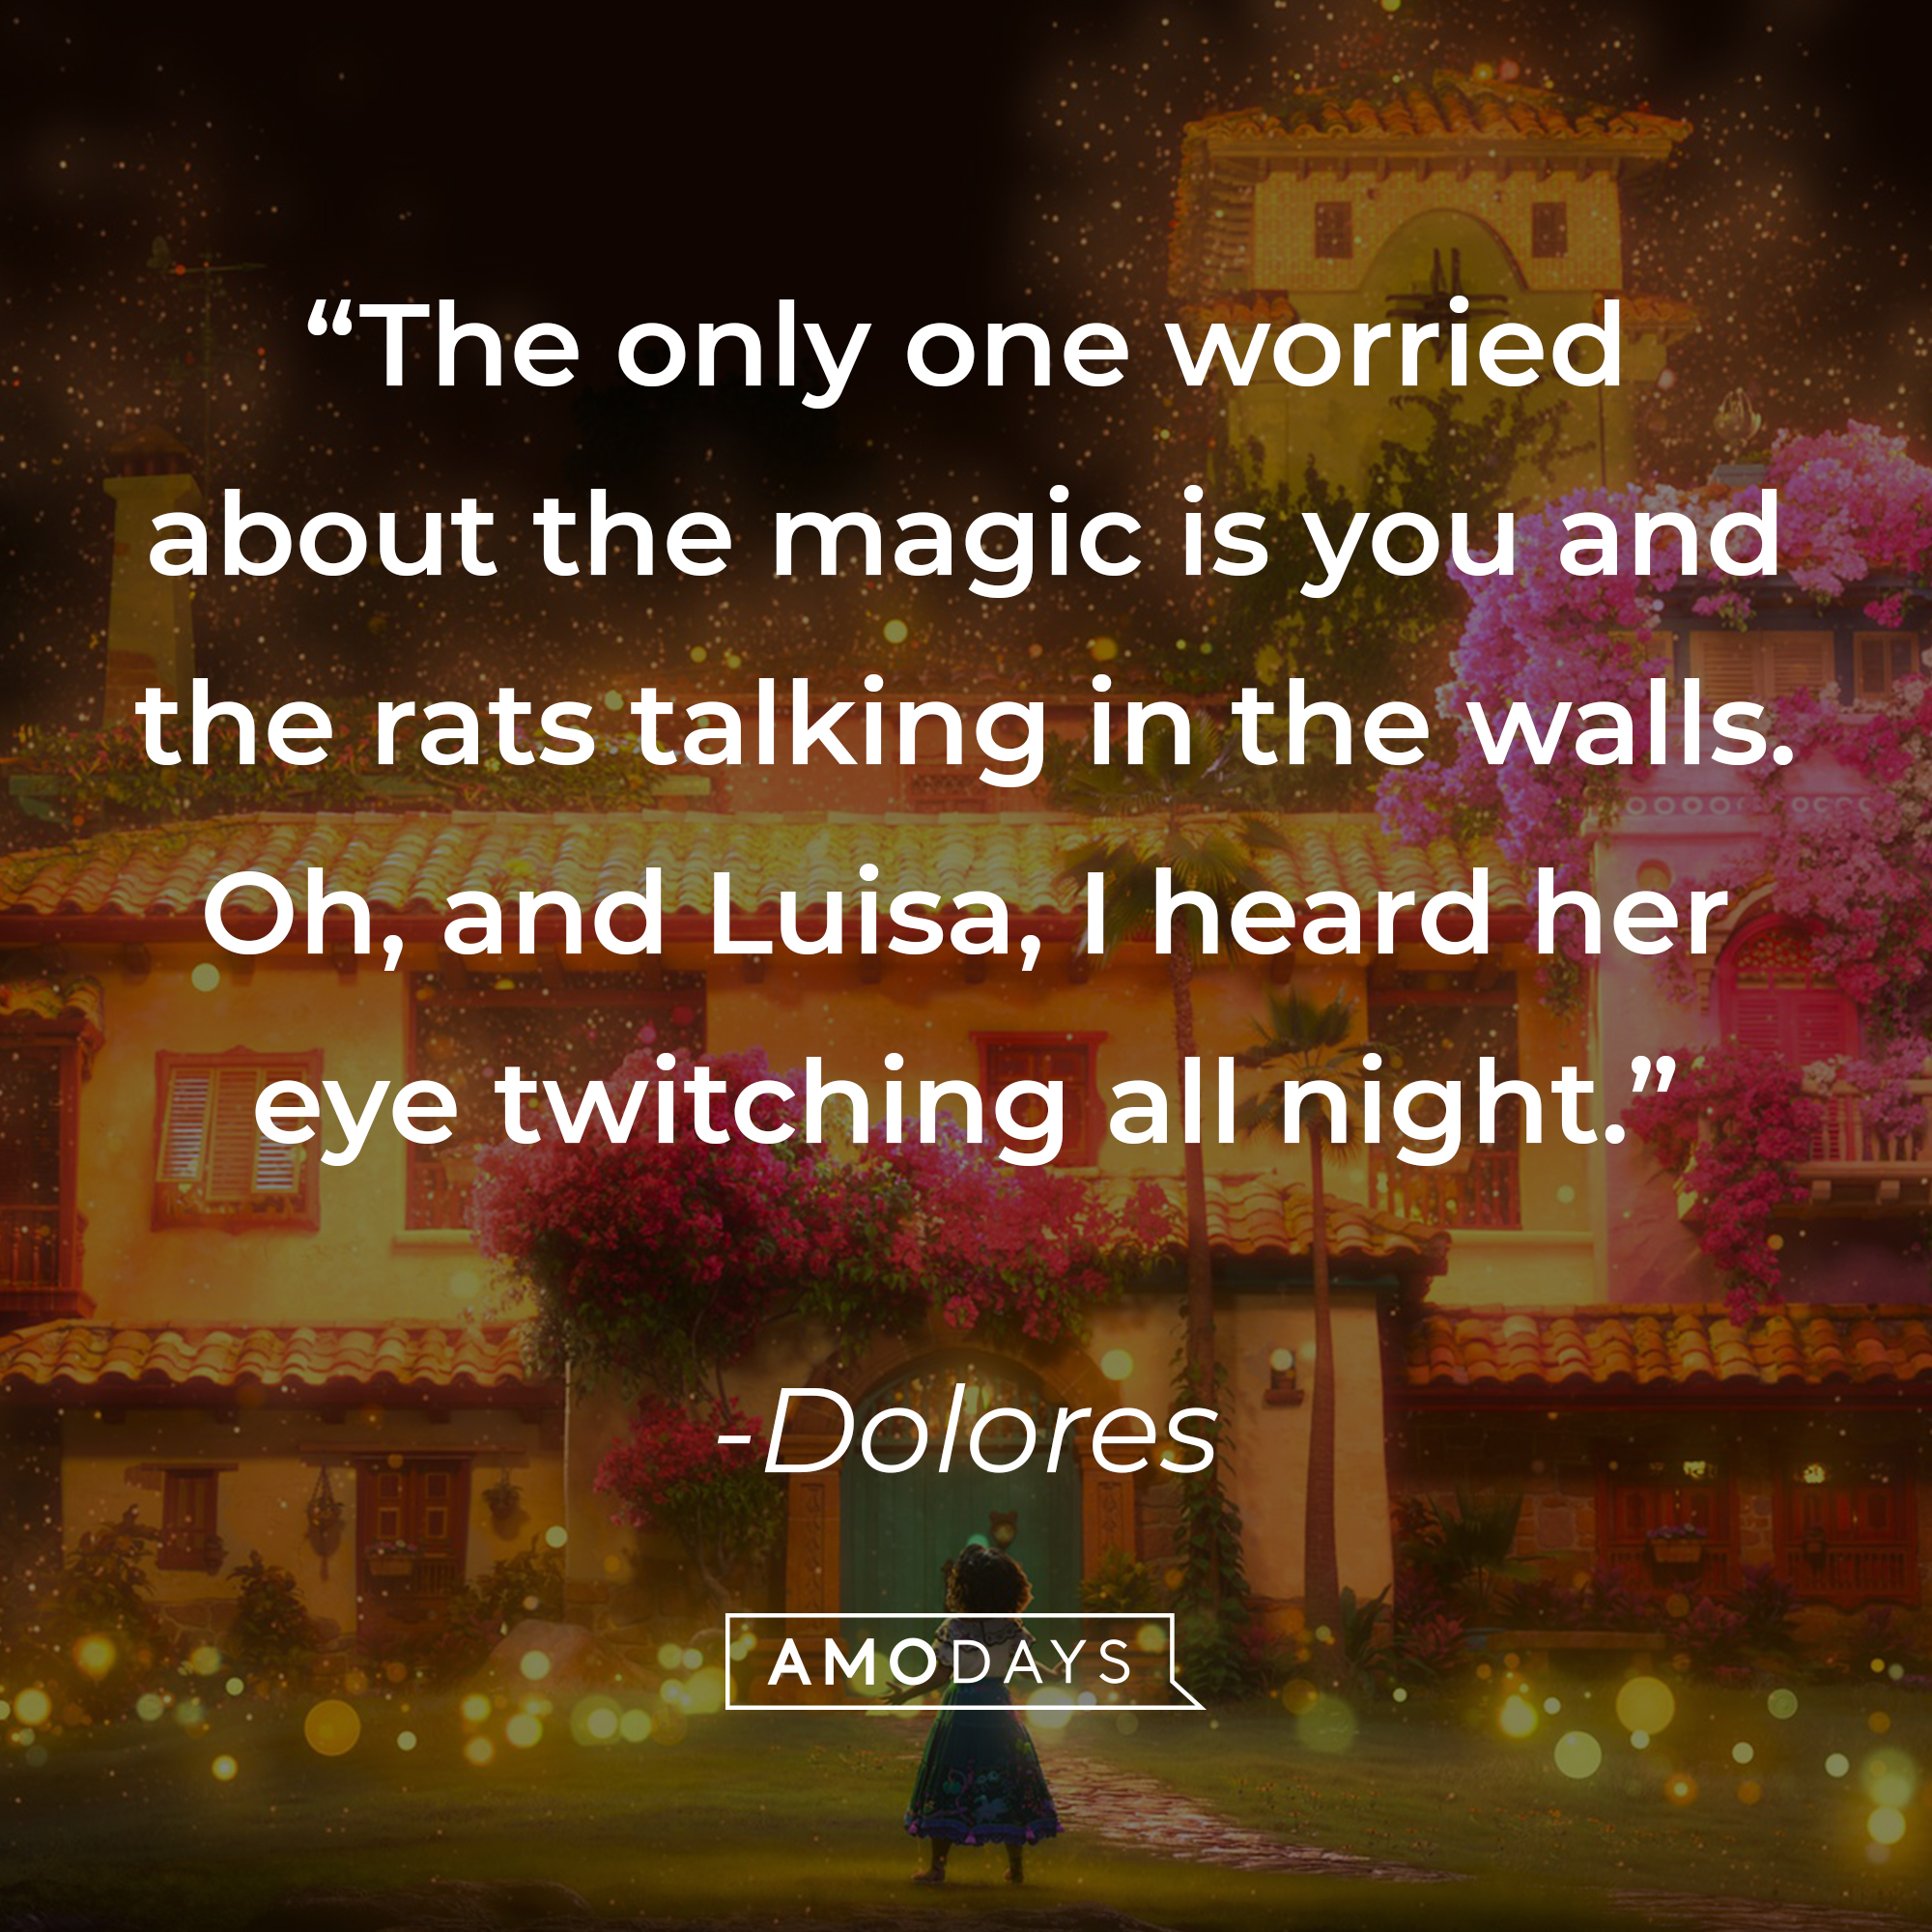 Dolores's quote: "The only one worried about the magic is you and the rats talking in the walls. Oh, and Luisa, I heard her eye twitching all night." | Source: facebook.com/EncantoMovie